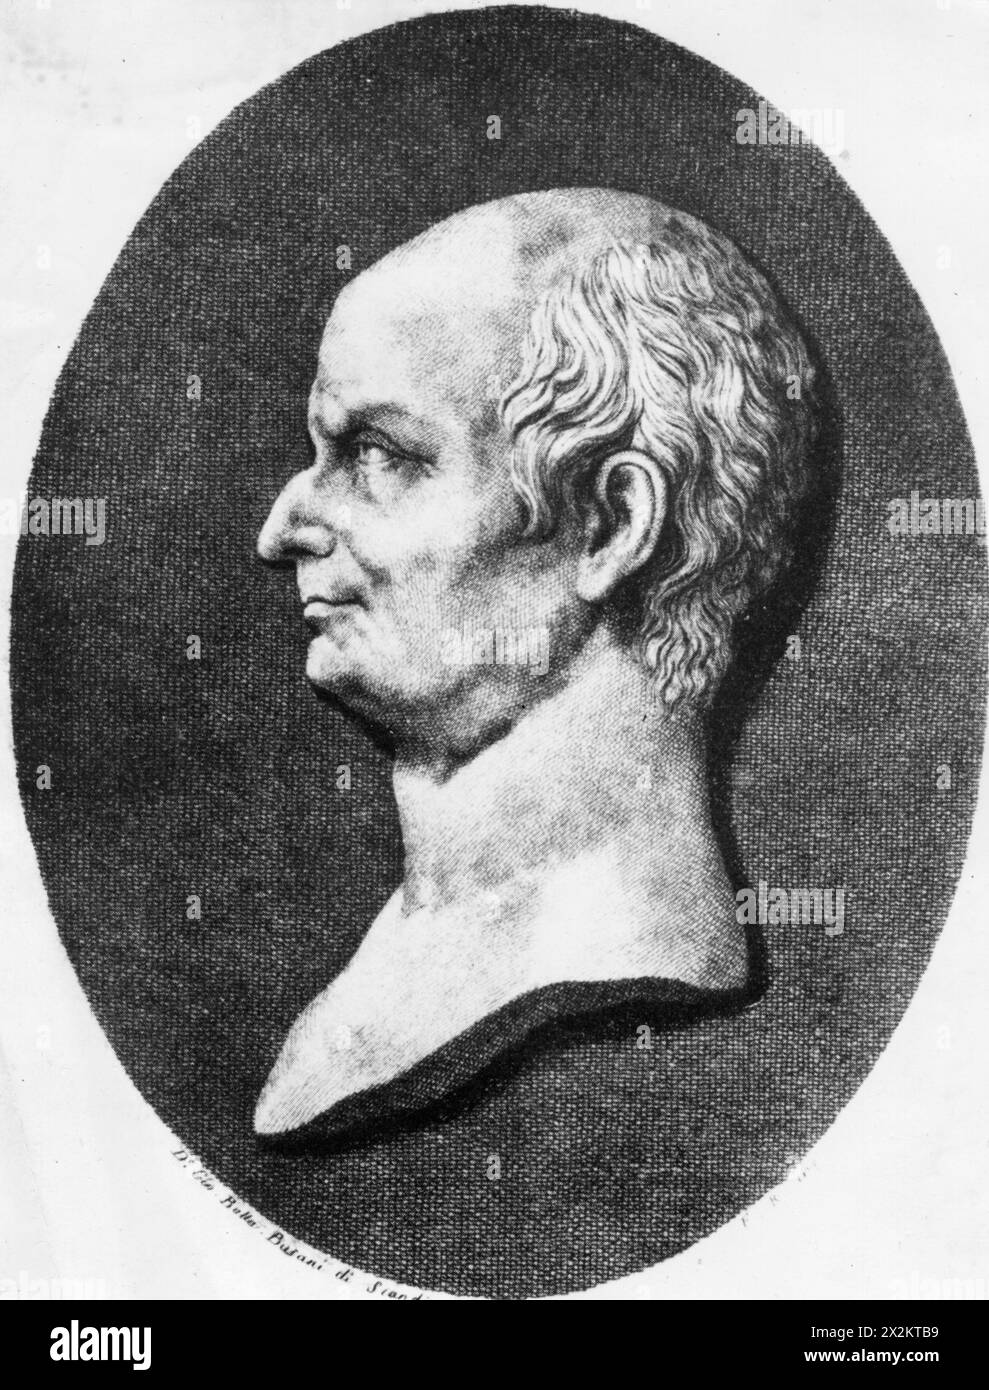 Spallanzani, Lazzaro, 12.1.1729 - 12.2,1799, biologiste italien, gravure sur cuivre, EXTRA-RIGHTS-LEARANCE-INFO-NOT-AVAILABLE Banque D'Images